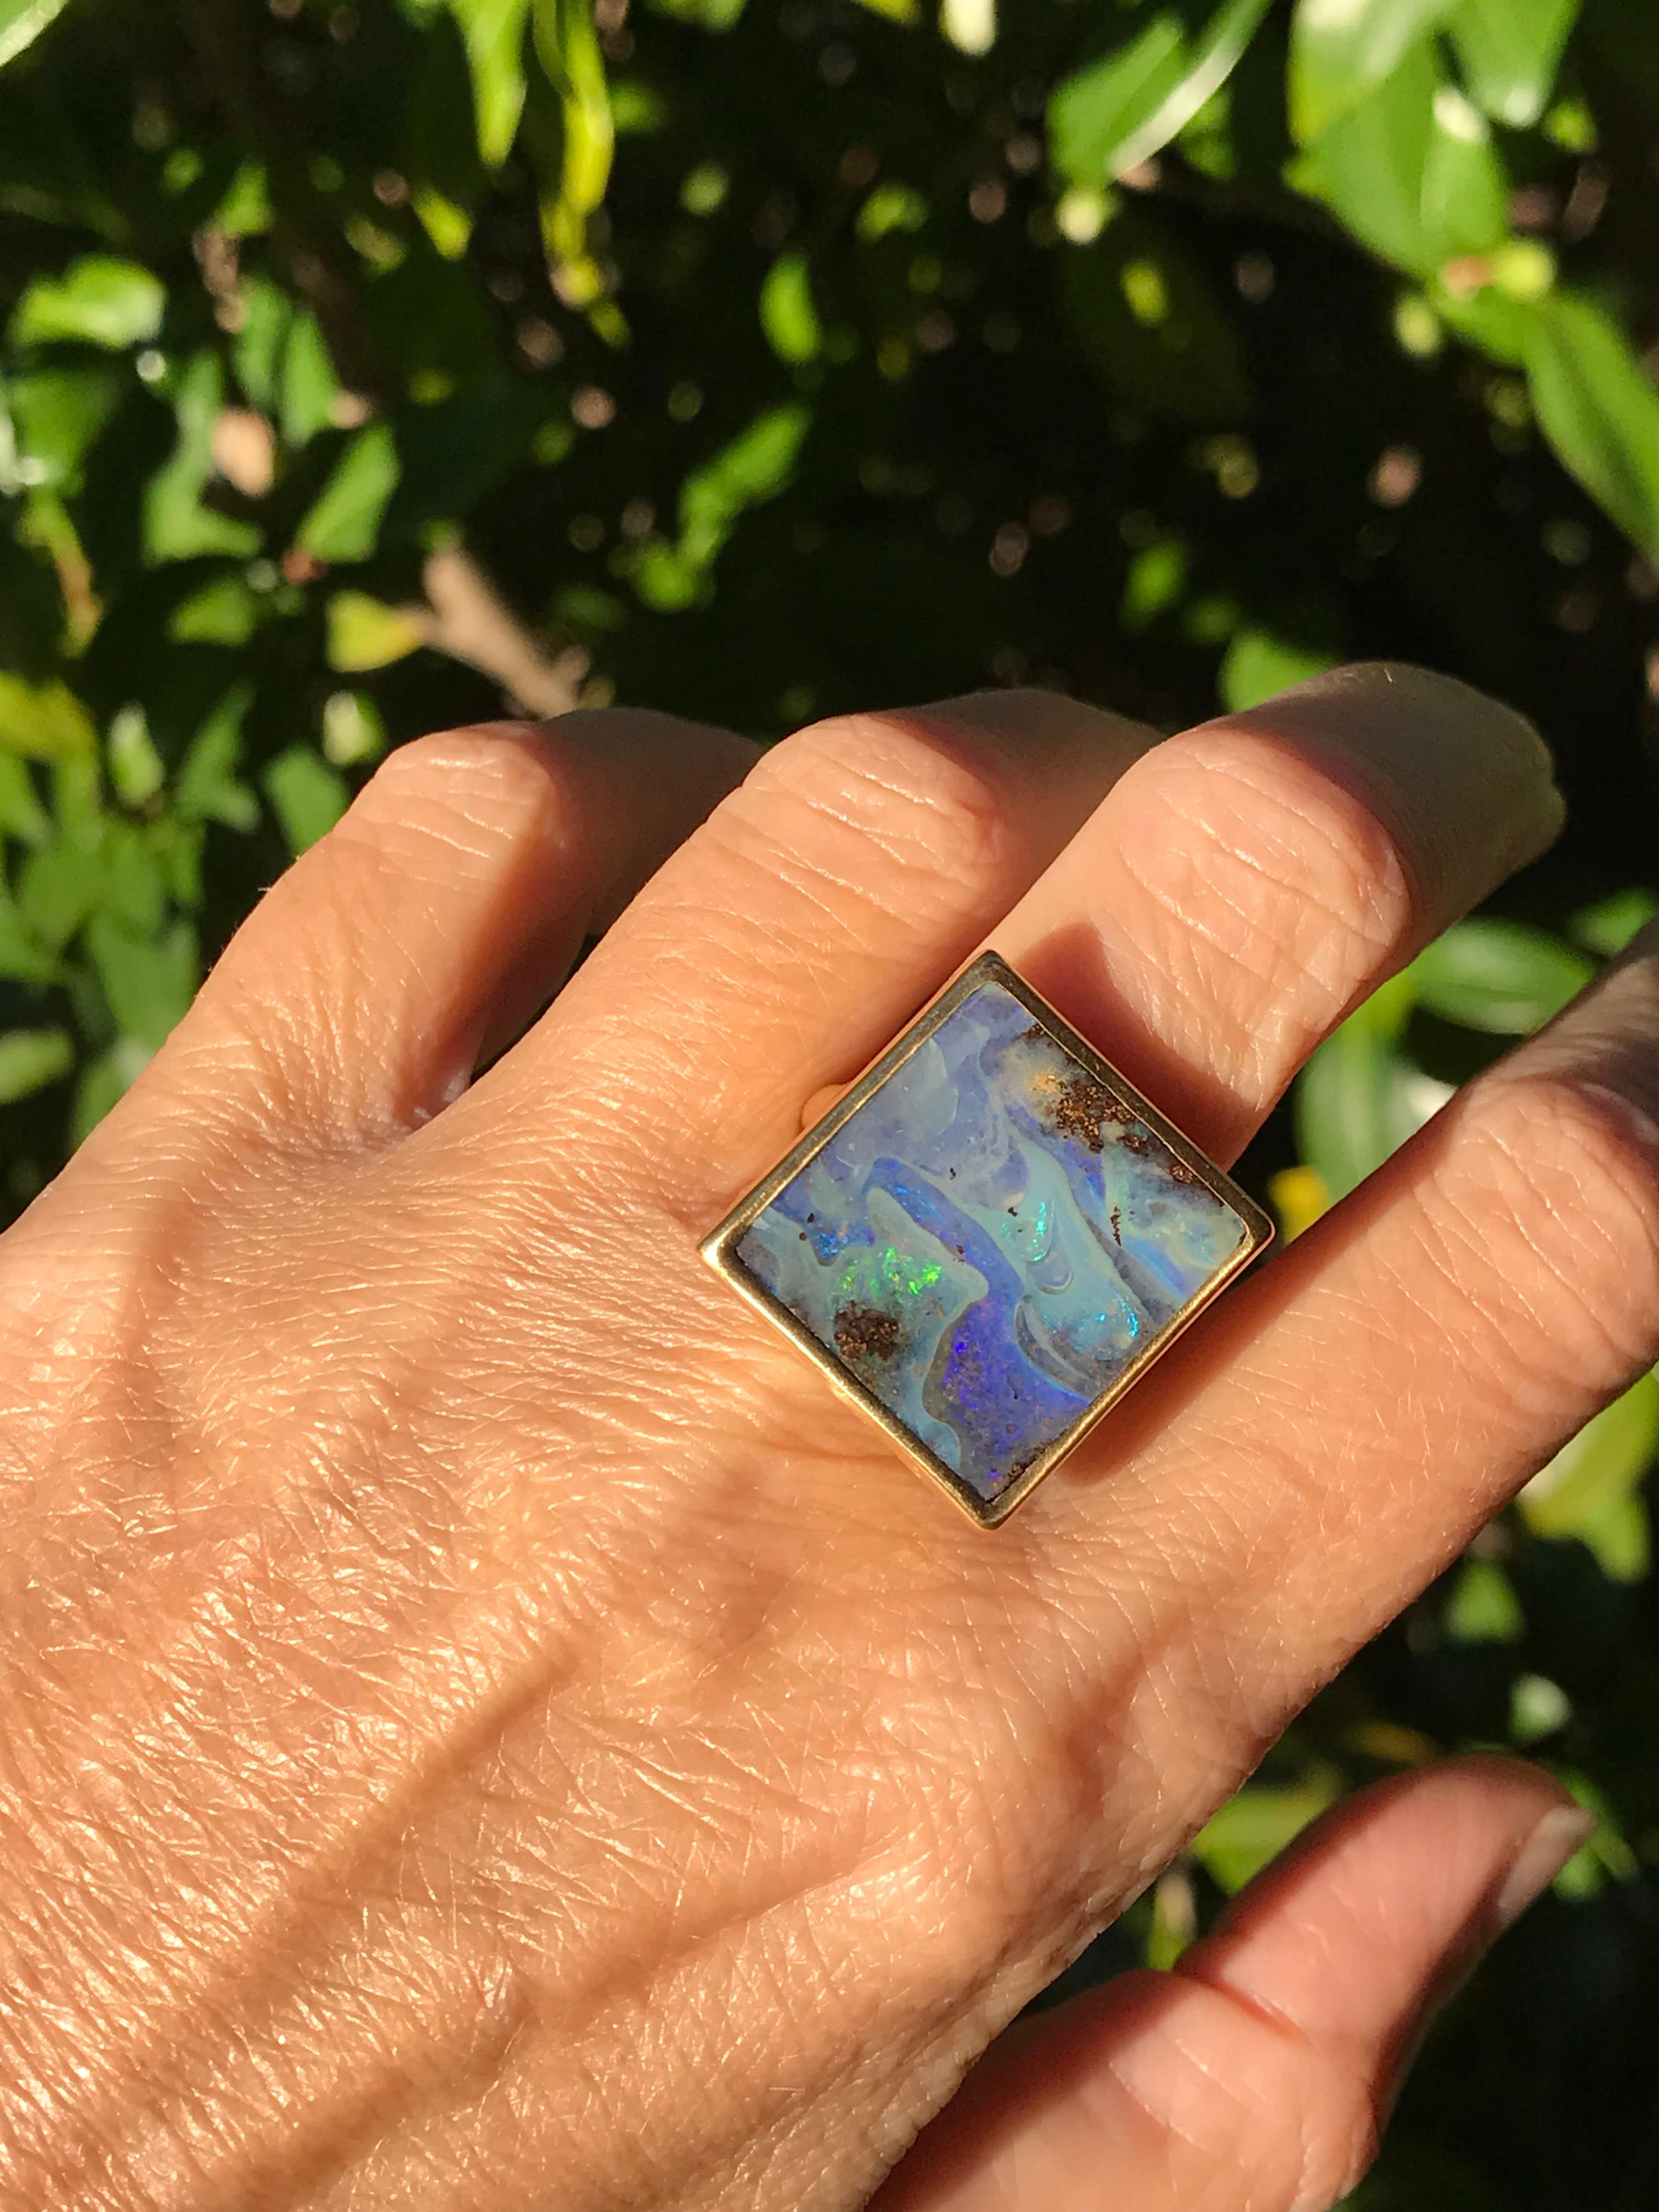 Dalben design One of a kind 18k yellow gold semi lucid finishing ring with a 13,7 carat bezel-set wonderful rectangular Boulder Opal.  
This Australian Boulder Opal has the  seabed colors  
Ring size 7 1/4 US - 55 EU re-sizable to most finger sizes.